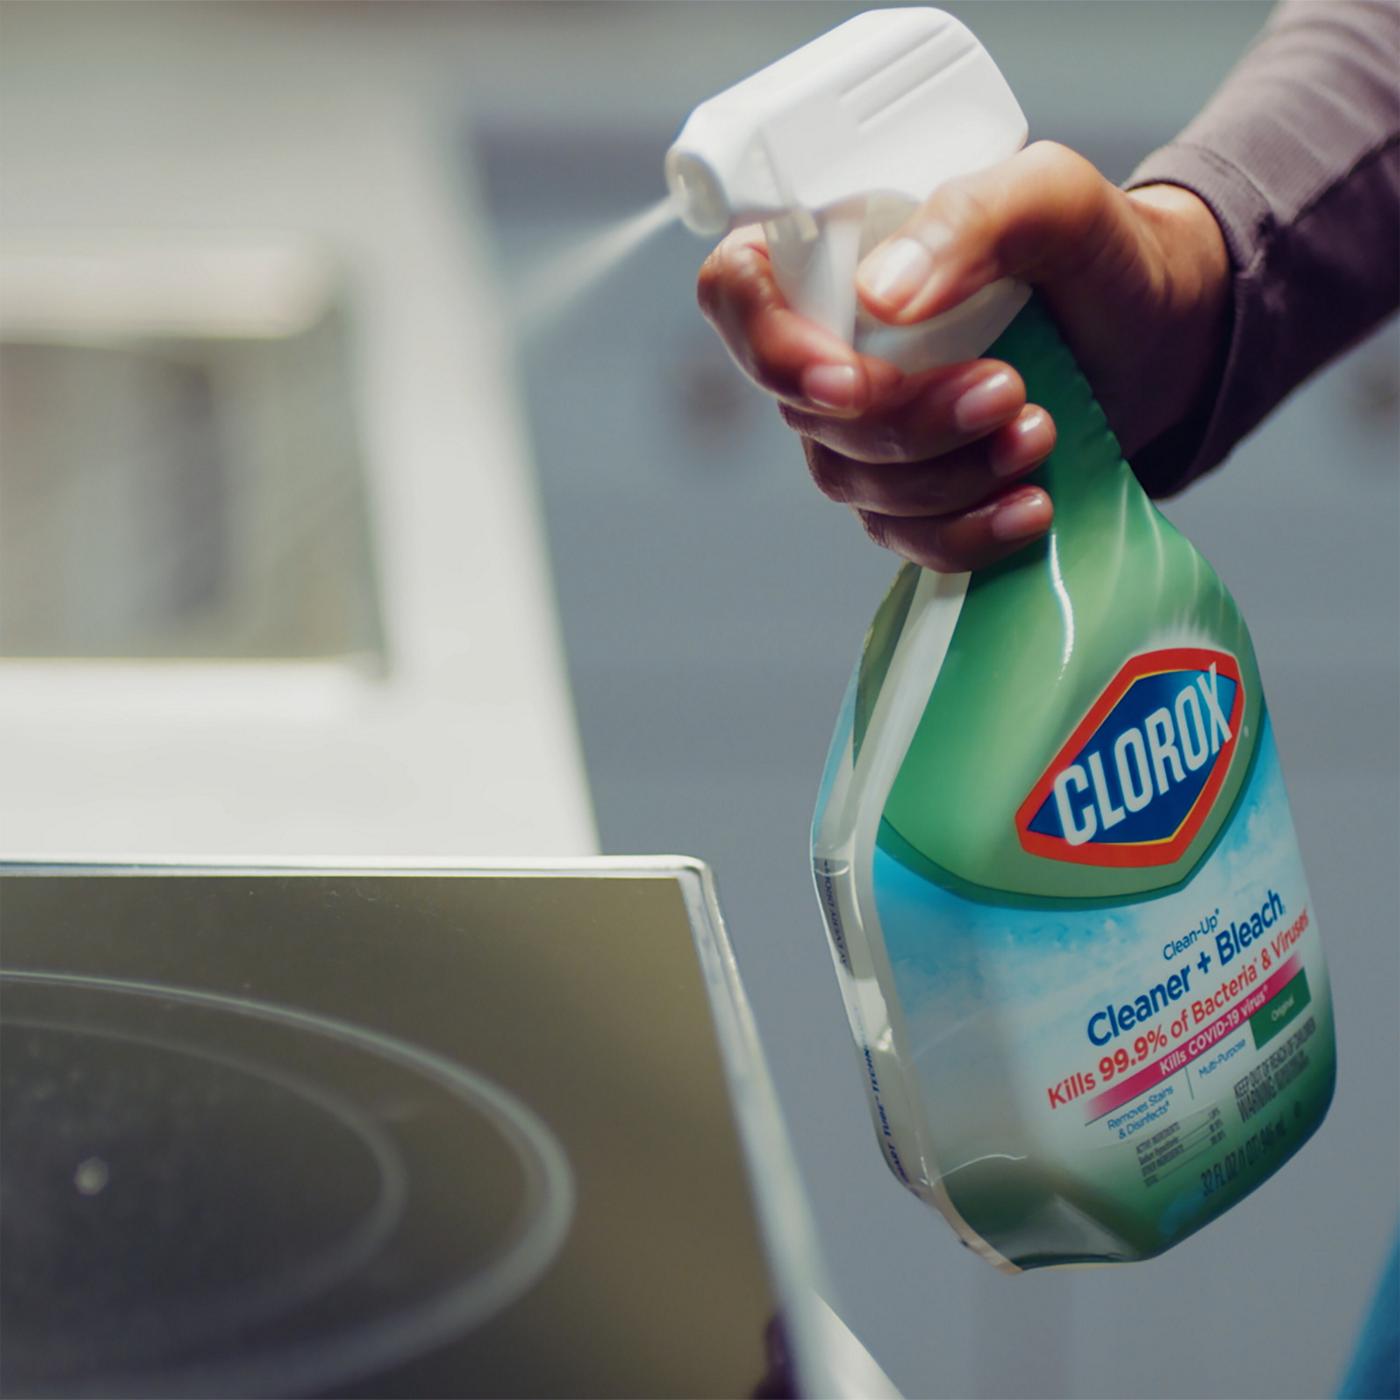 Clorox Clean-Up Cleaner & Bleach; image 8 of 13